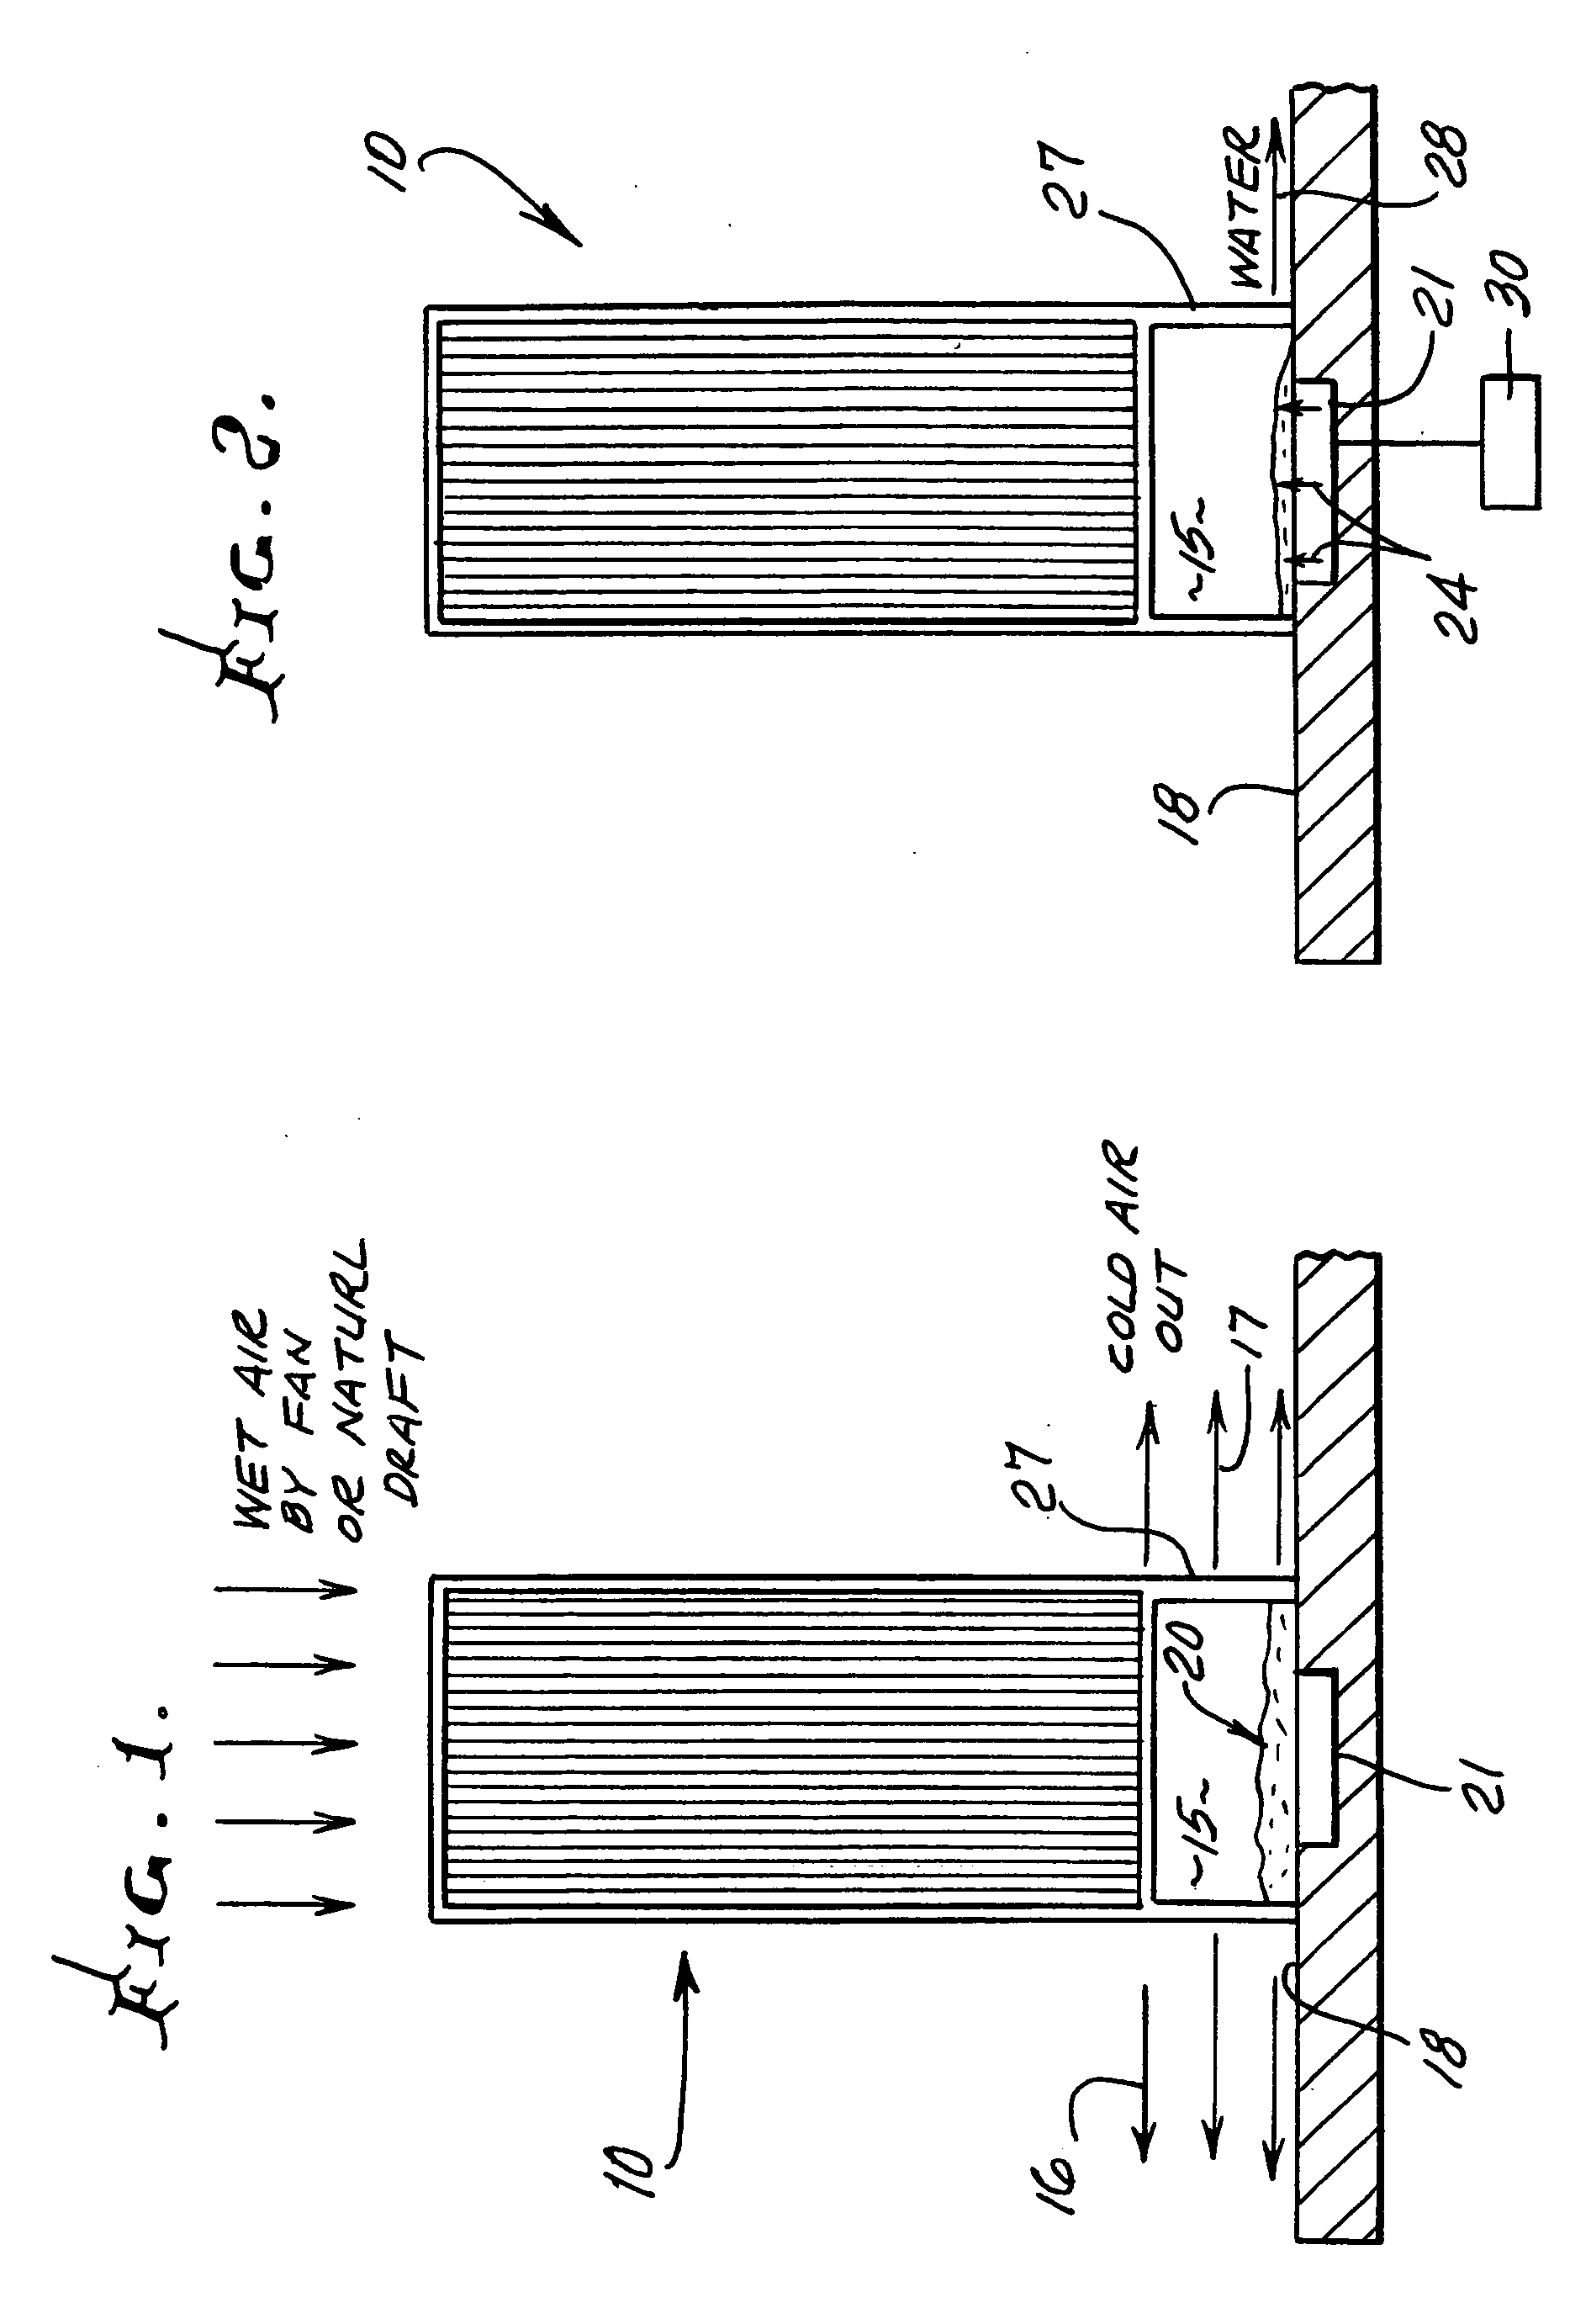 Thermal method for ice removal under ambient air cryogenic vaporizers